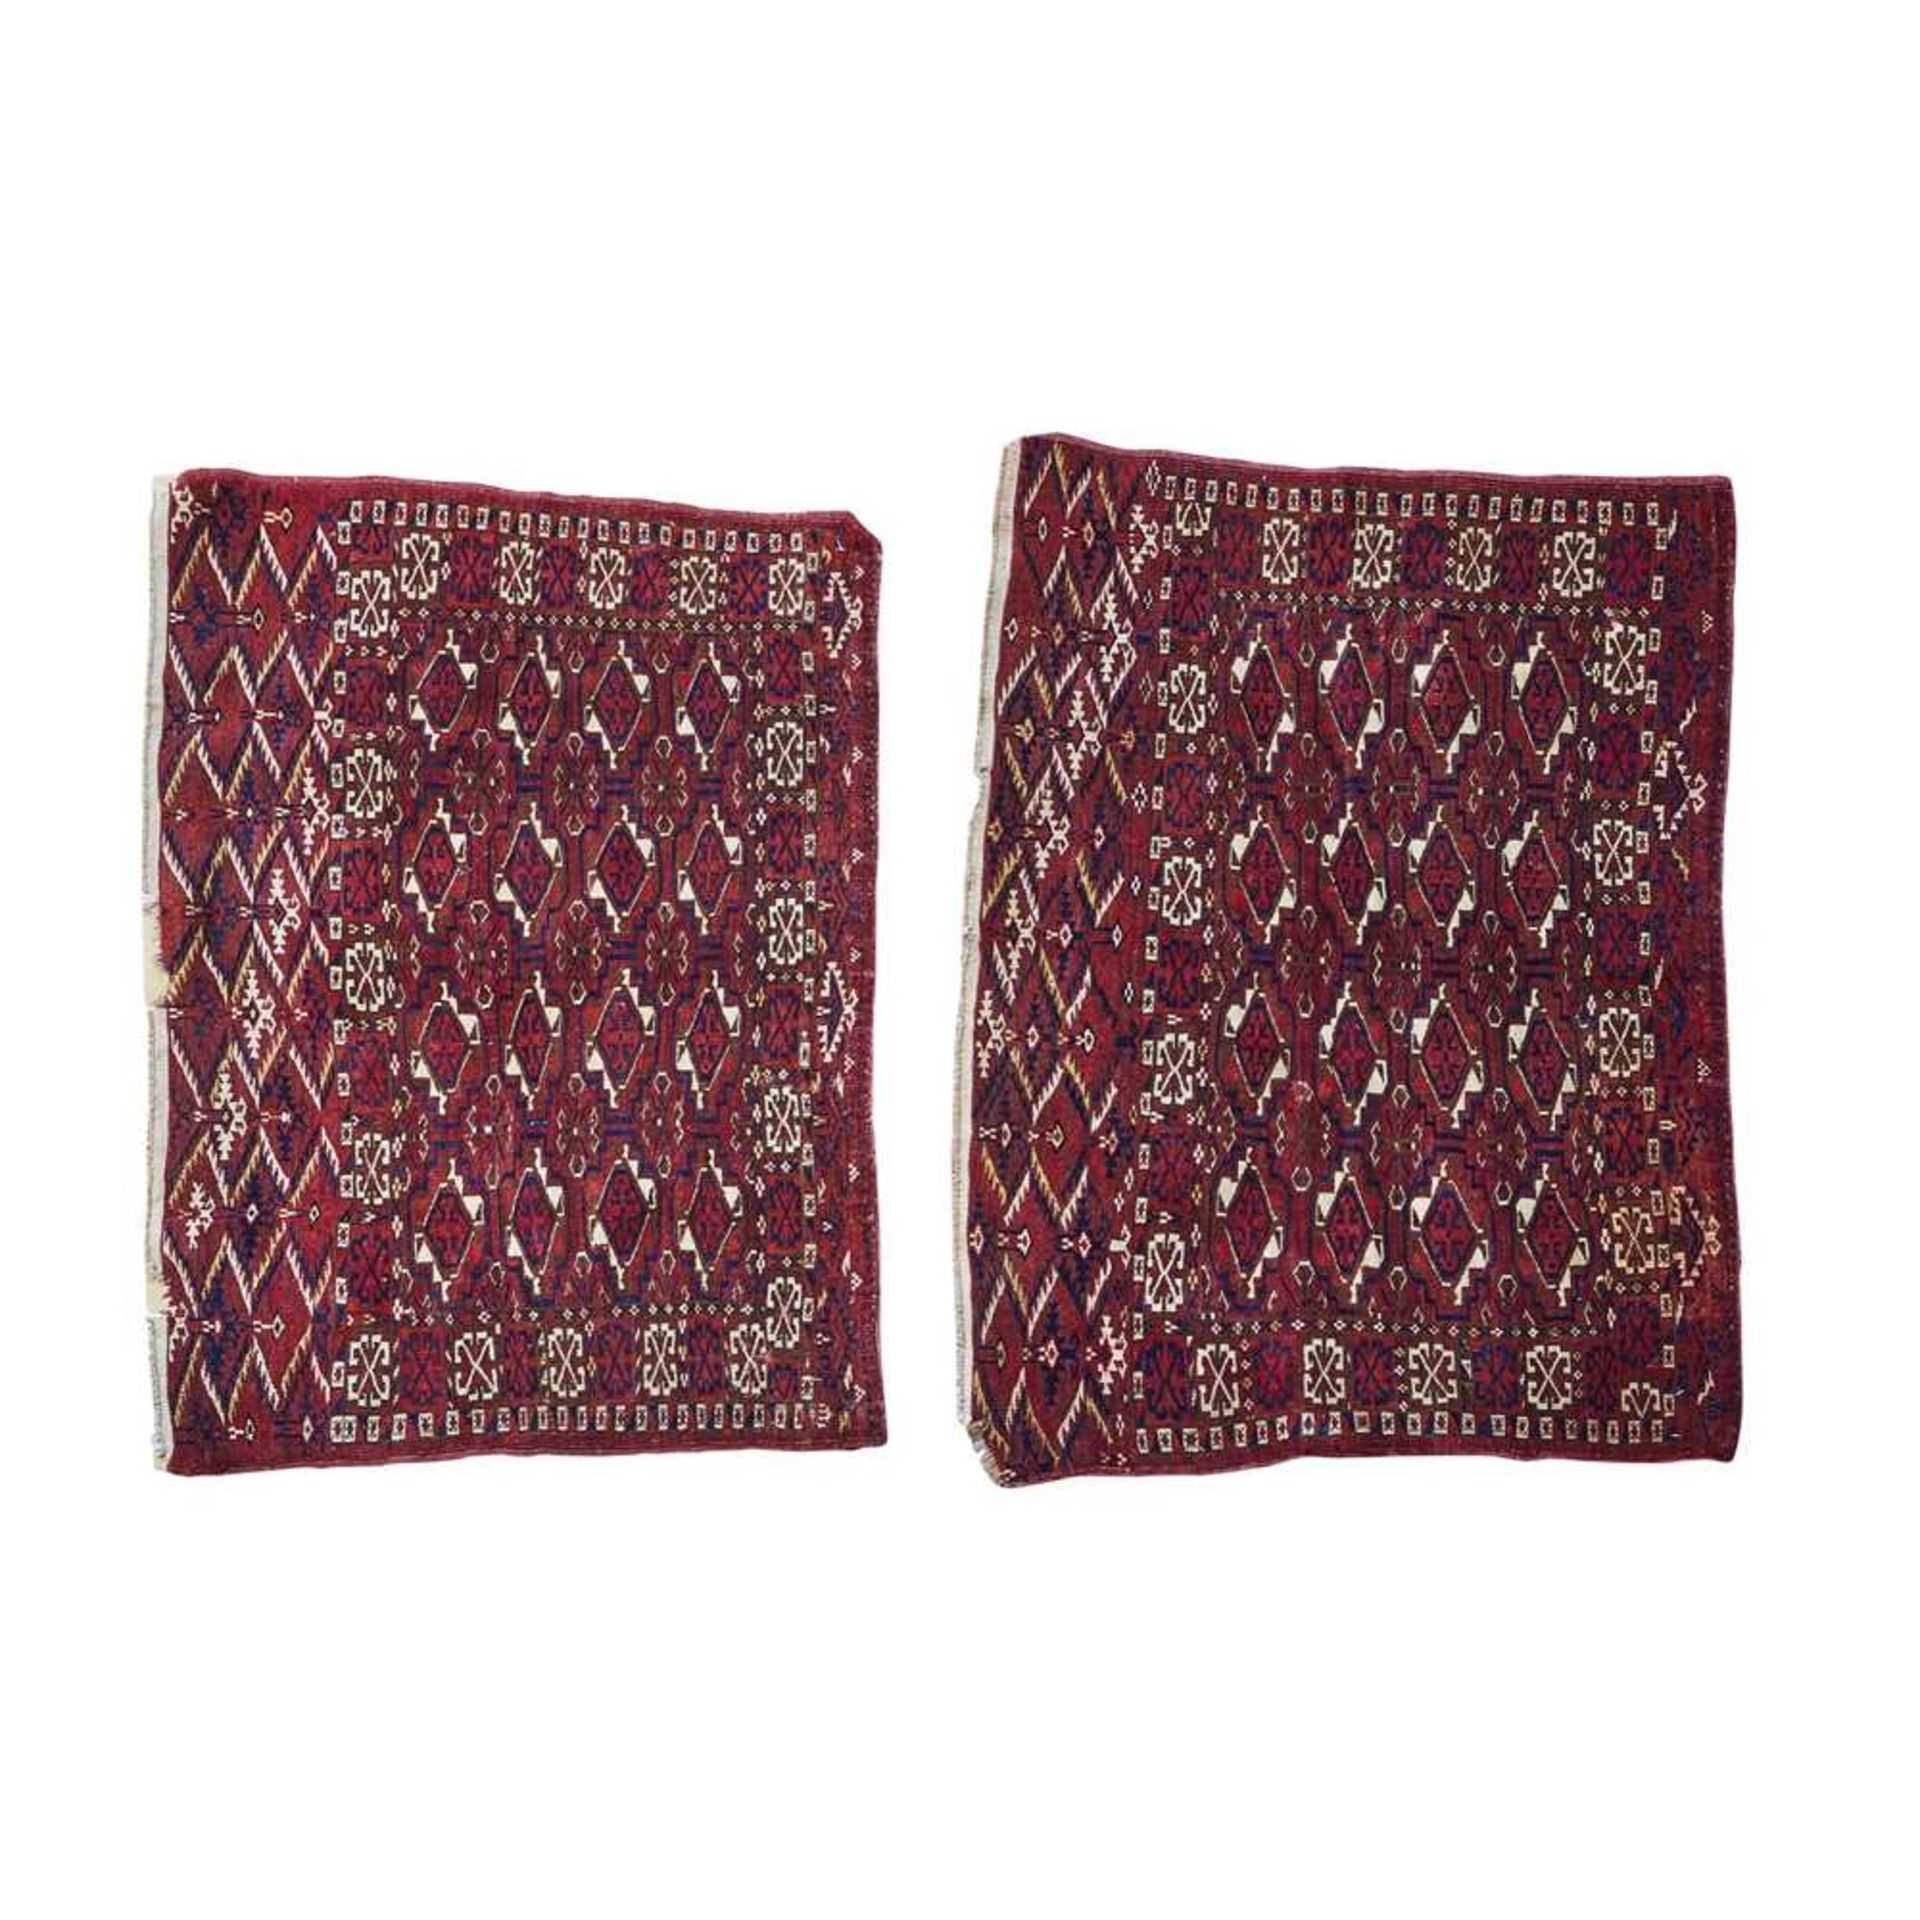 PAIR OF TEKKE JUVALS TURKMENISTAN, LATE 19TH/EARLY 20TH CENTURY